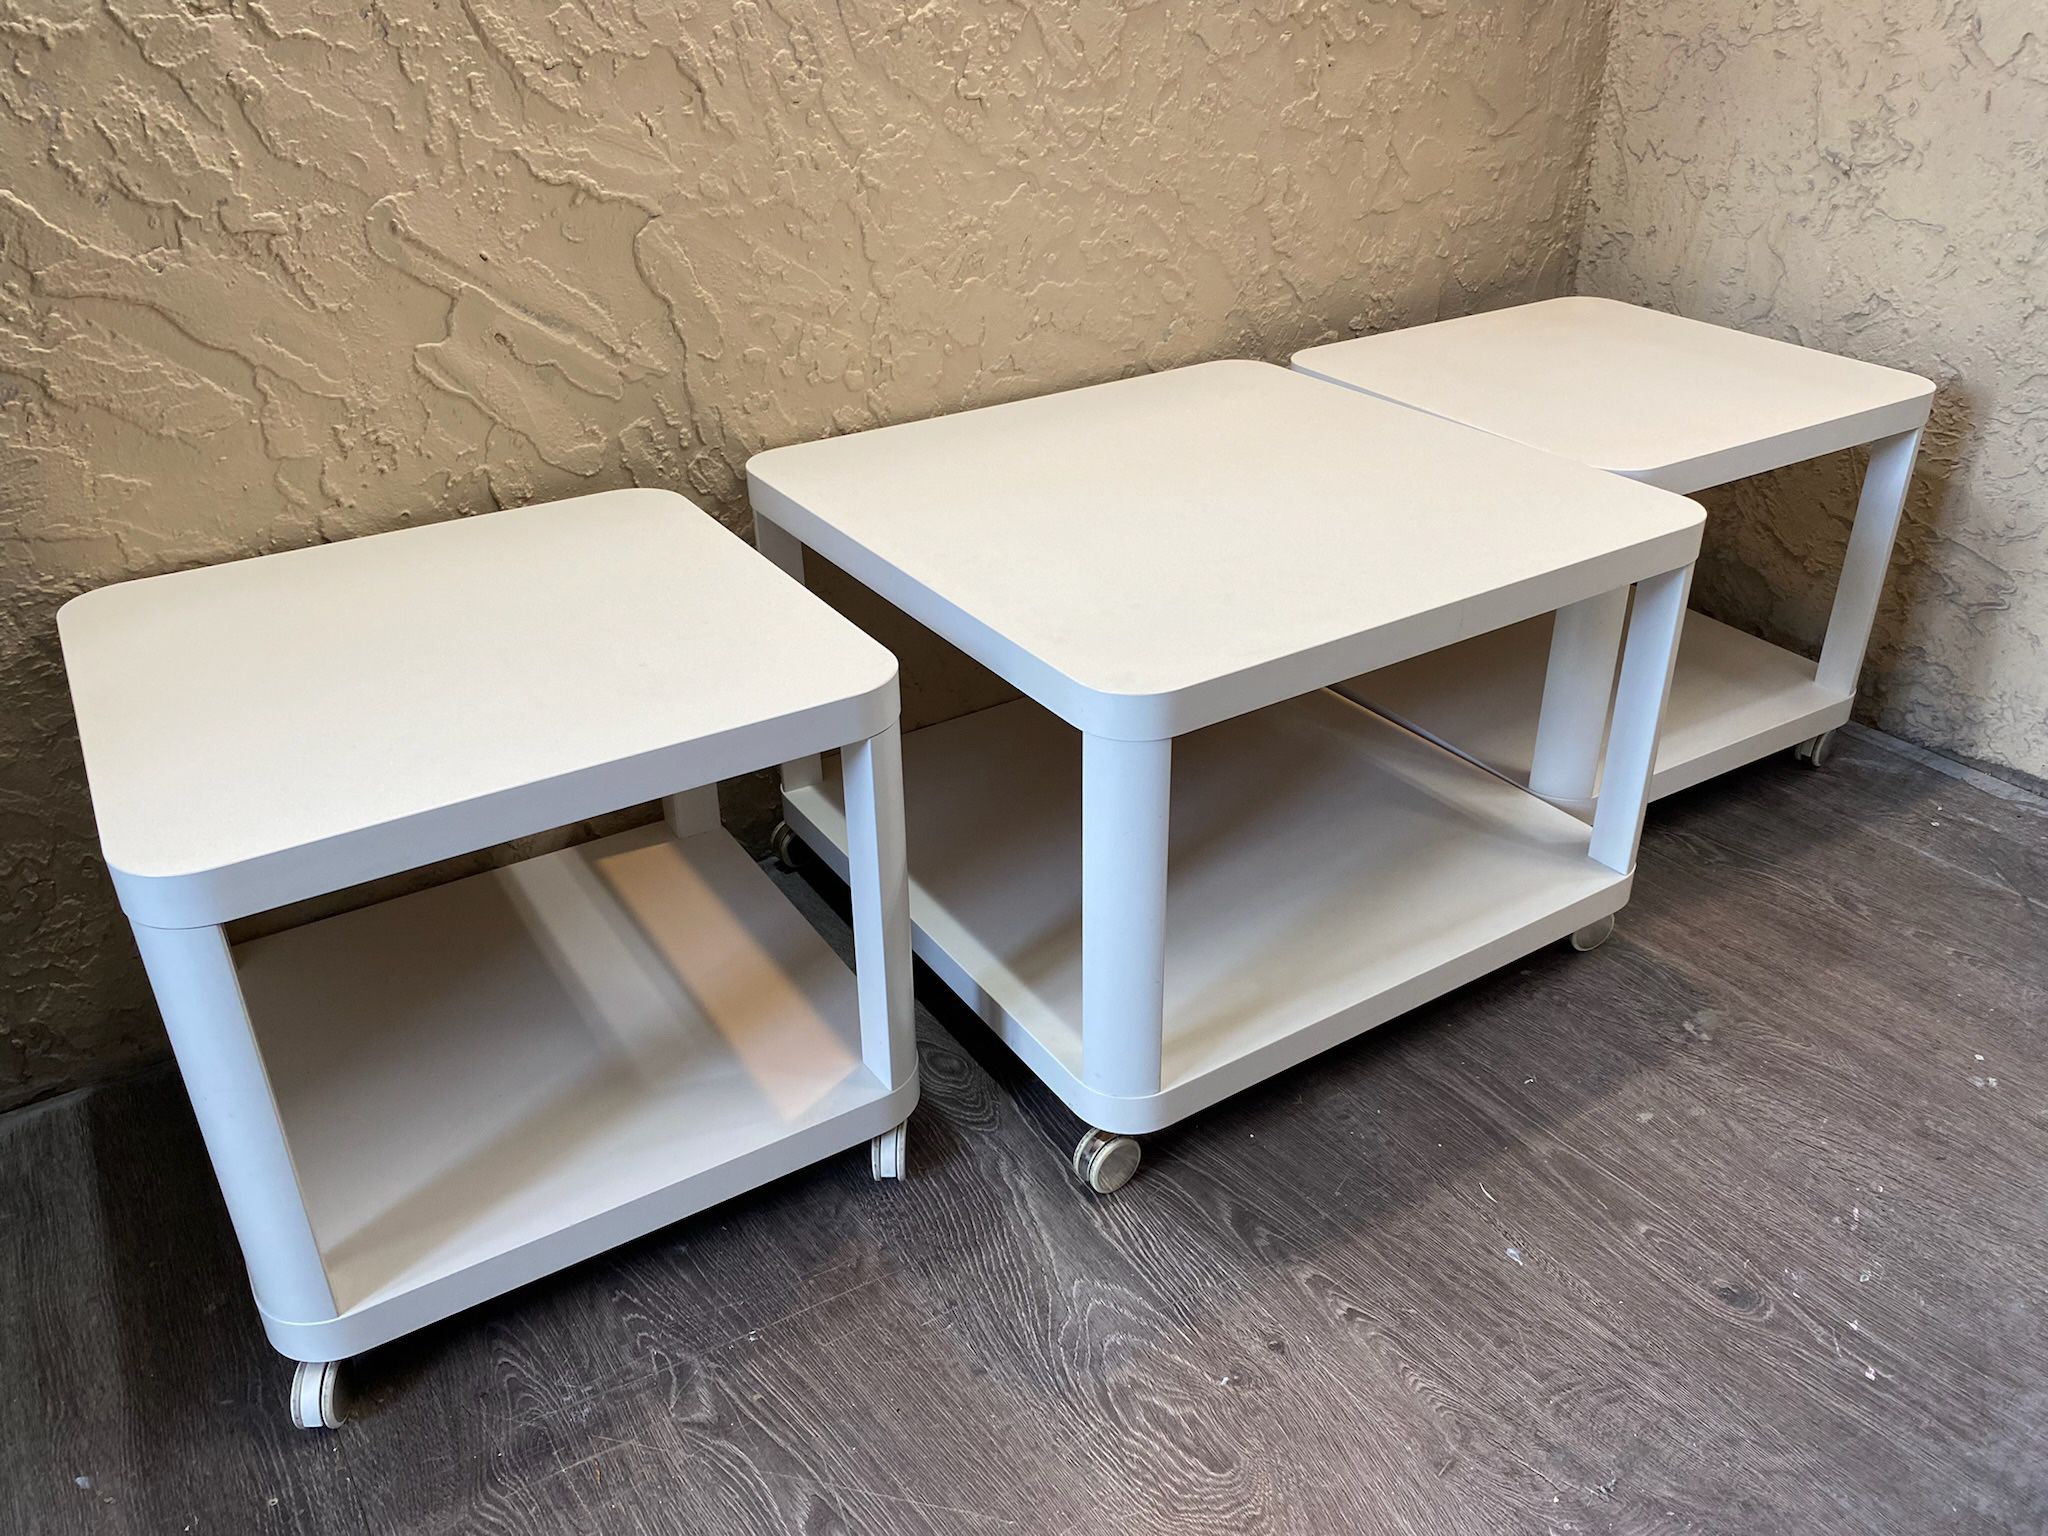 IKEA TINGBY Table Set on Wheels Local Delivery for a Fee - See My Items